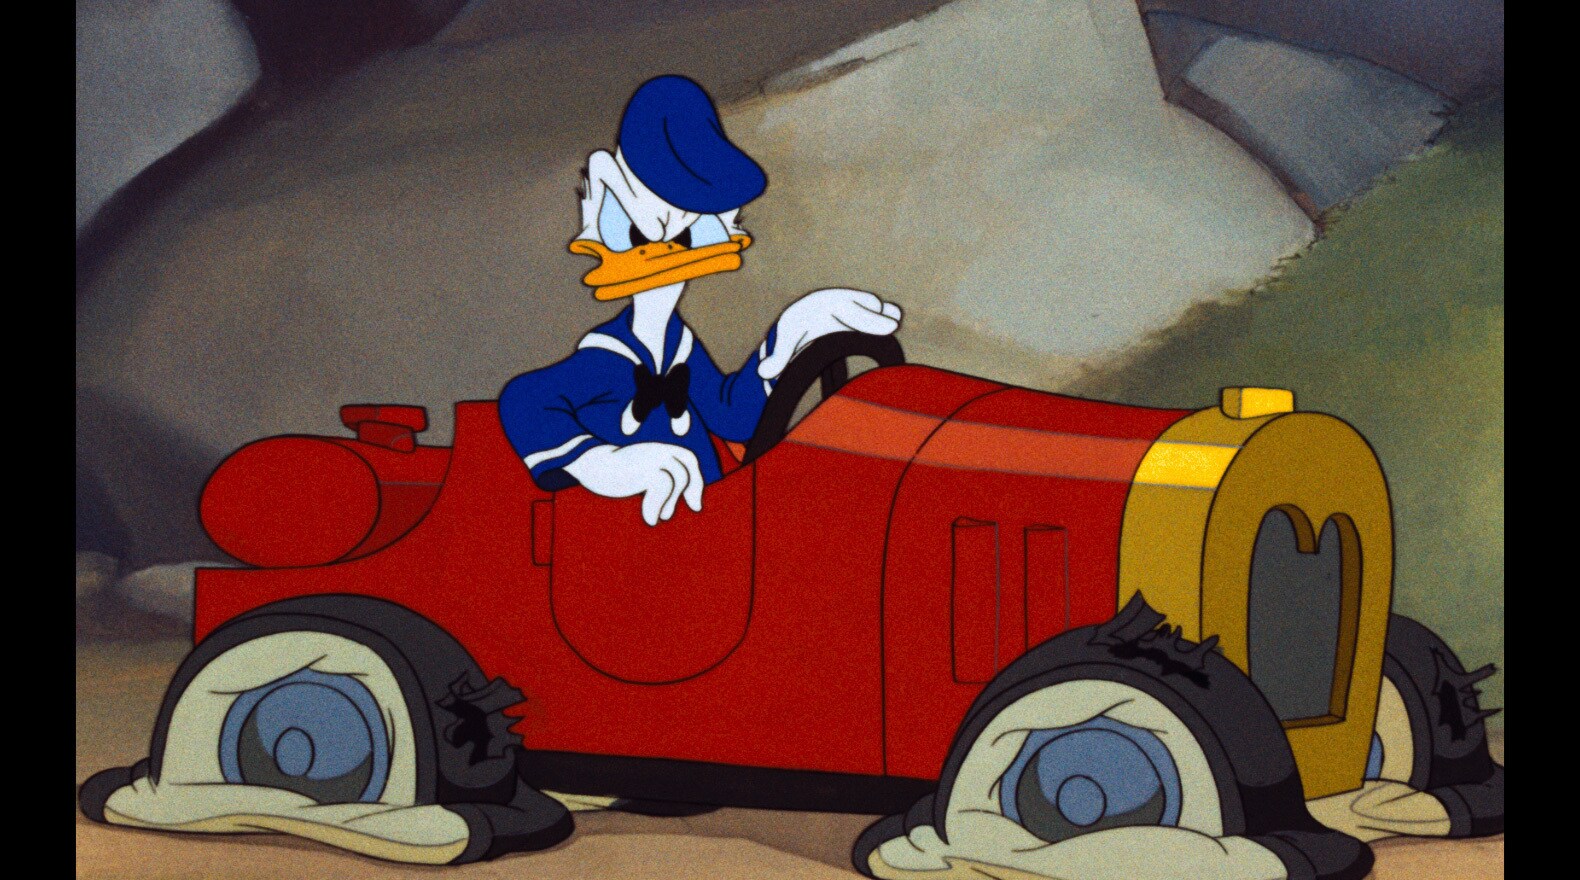 Donald doesn’t have the best luck when it comes to getting from one place to the other.